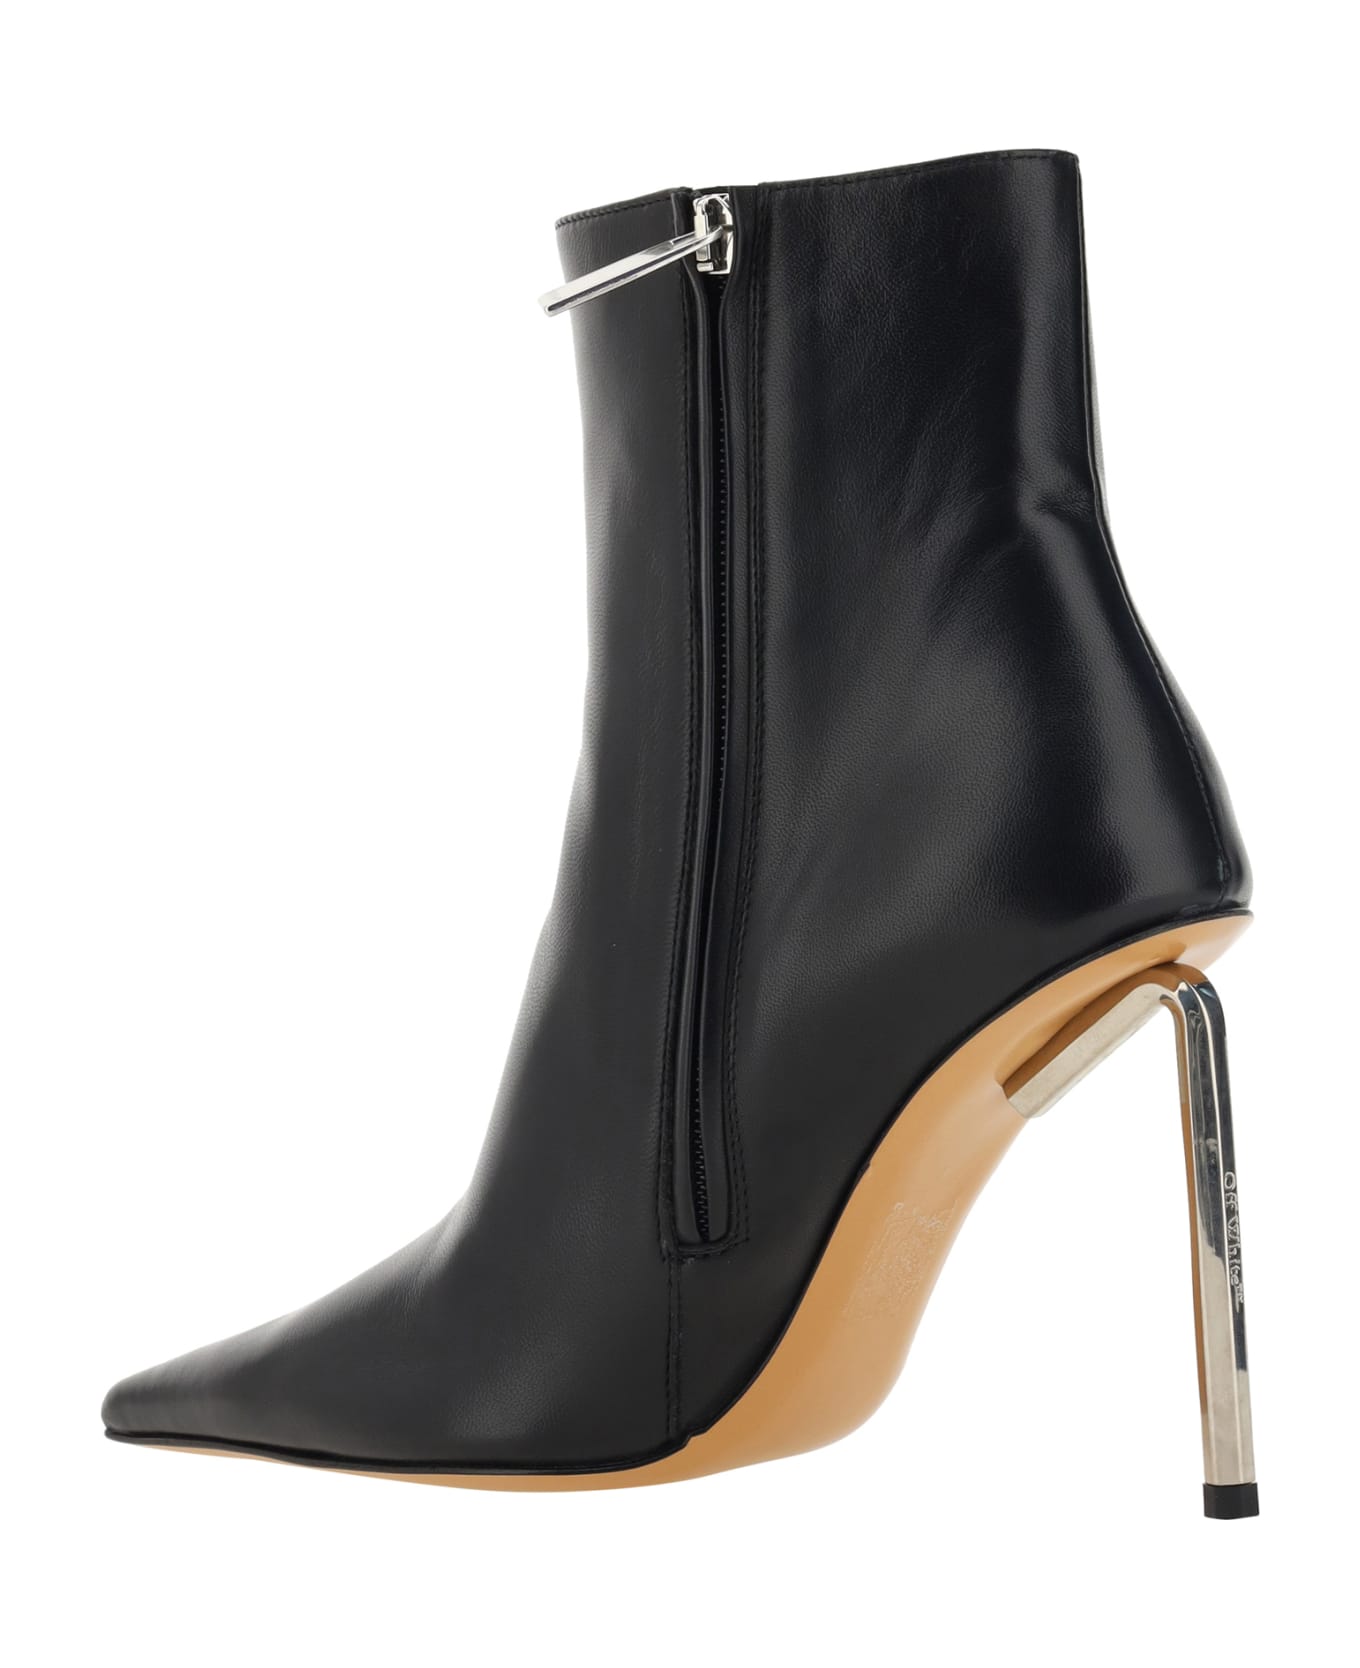 Off-White Ankle Boots - Black Silv